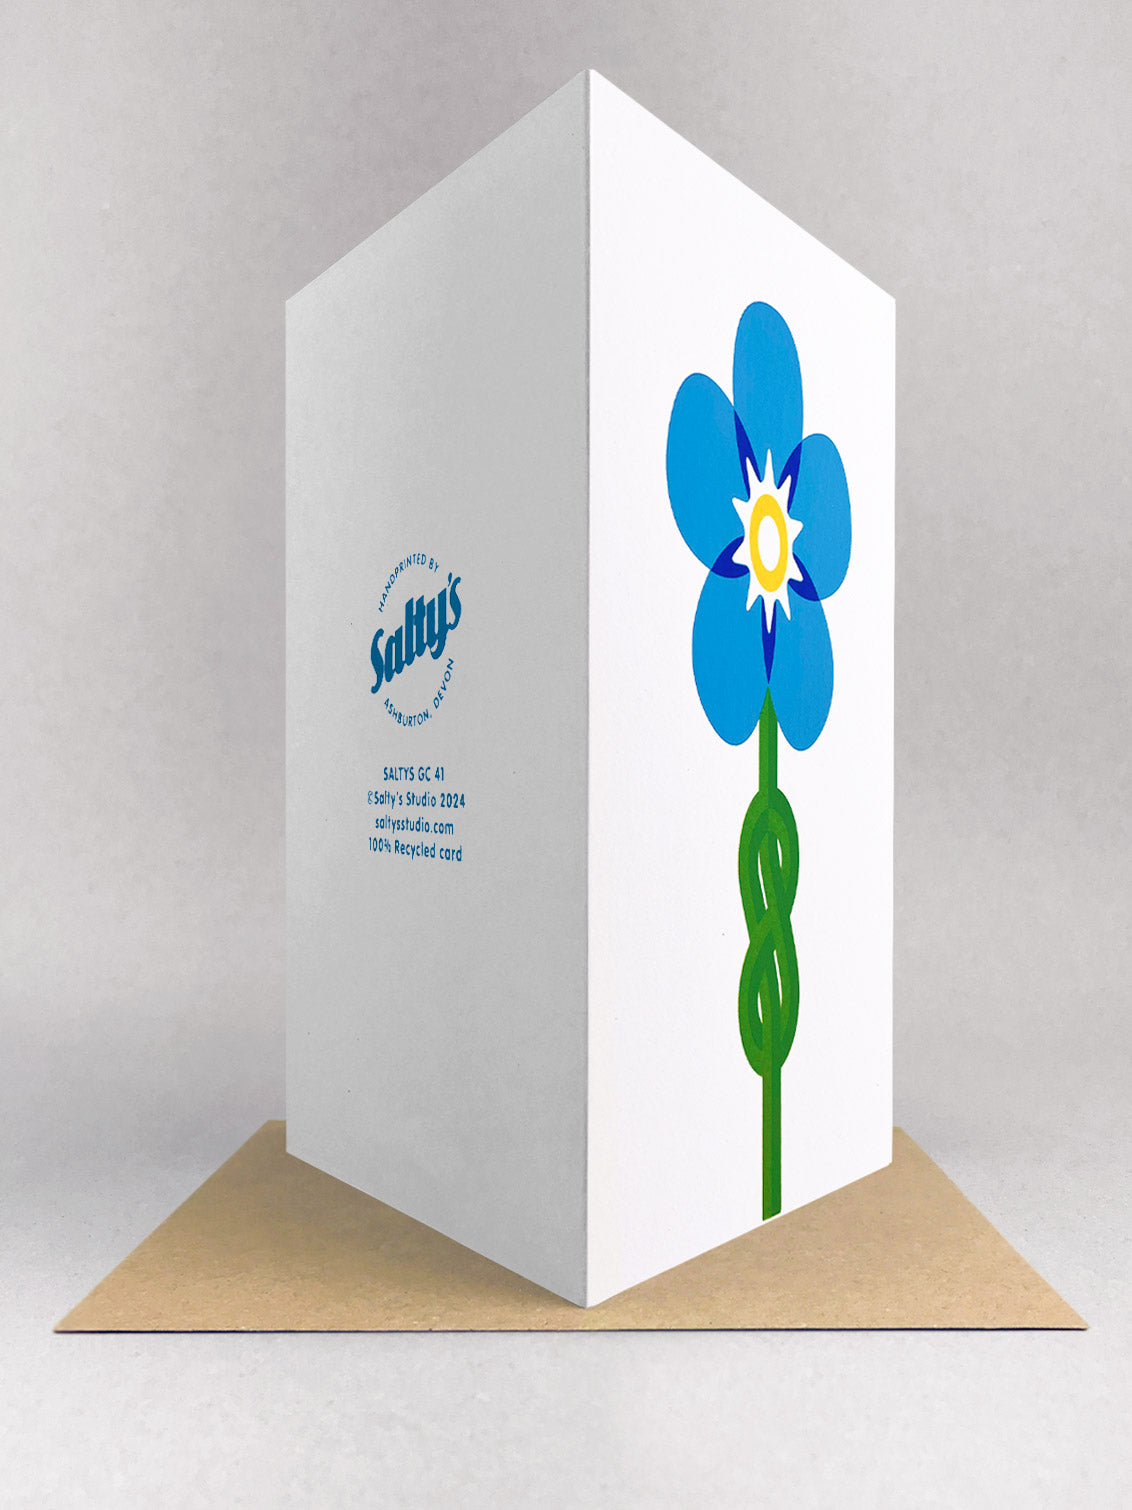 Rear view of a portrait greetings card, with a forget me knot image designed in minimal graphic style, using 5 colours blues, yellow and green screenprinted onto a white portrait card, stood in a light grey studio backdrop on a kraft envelope